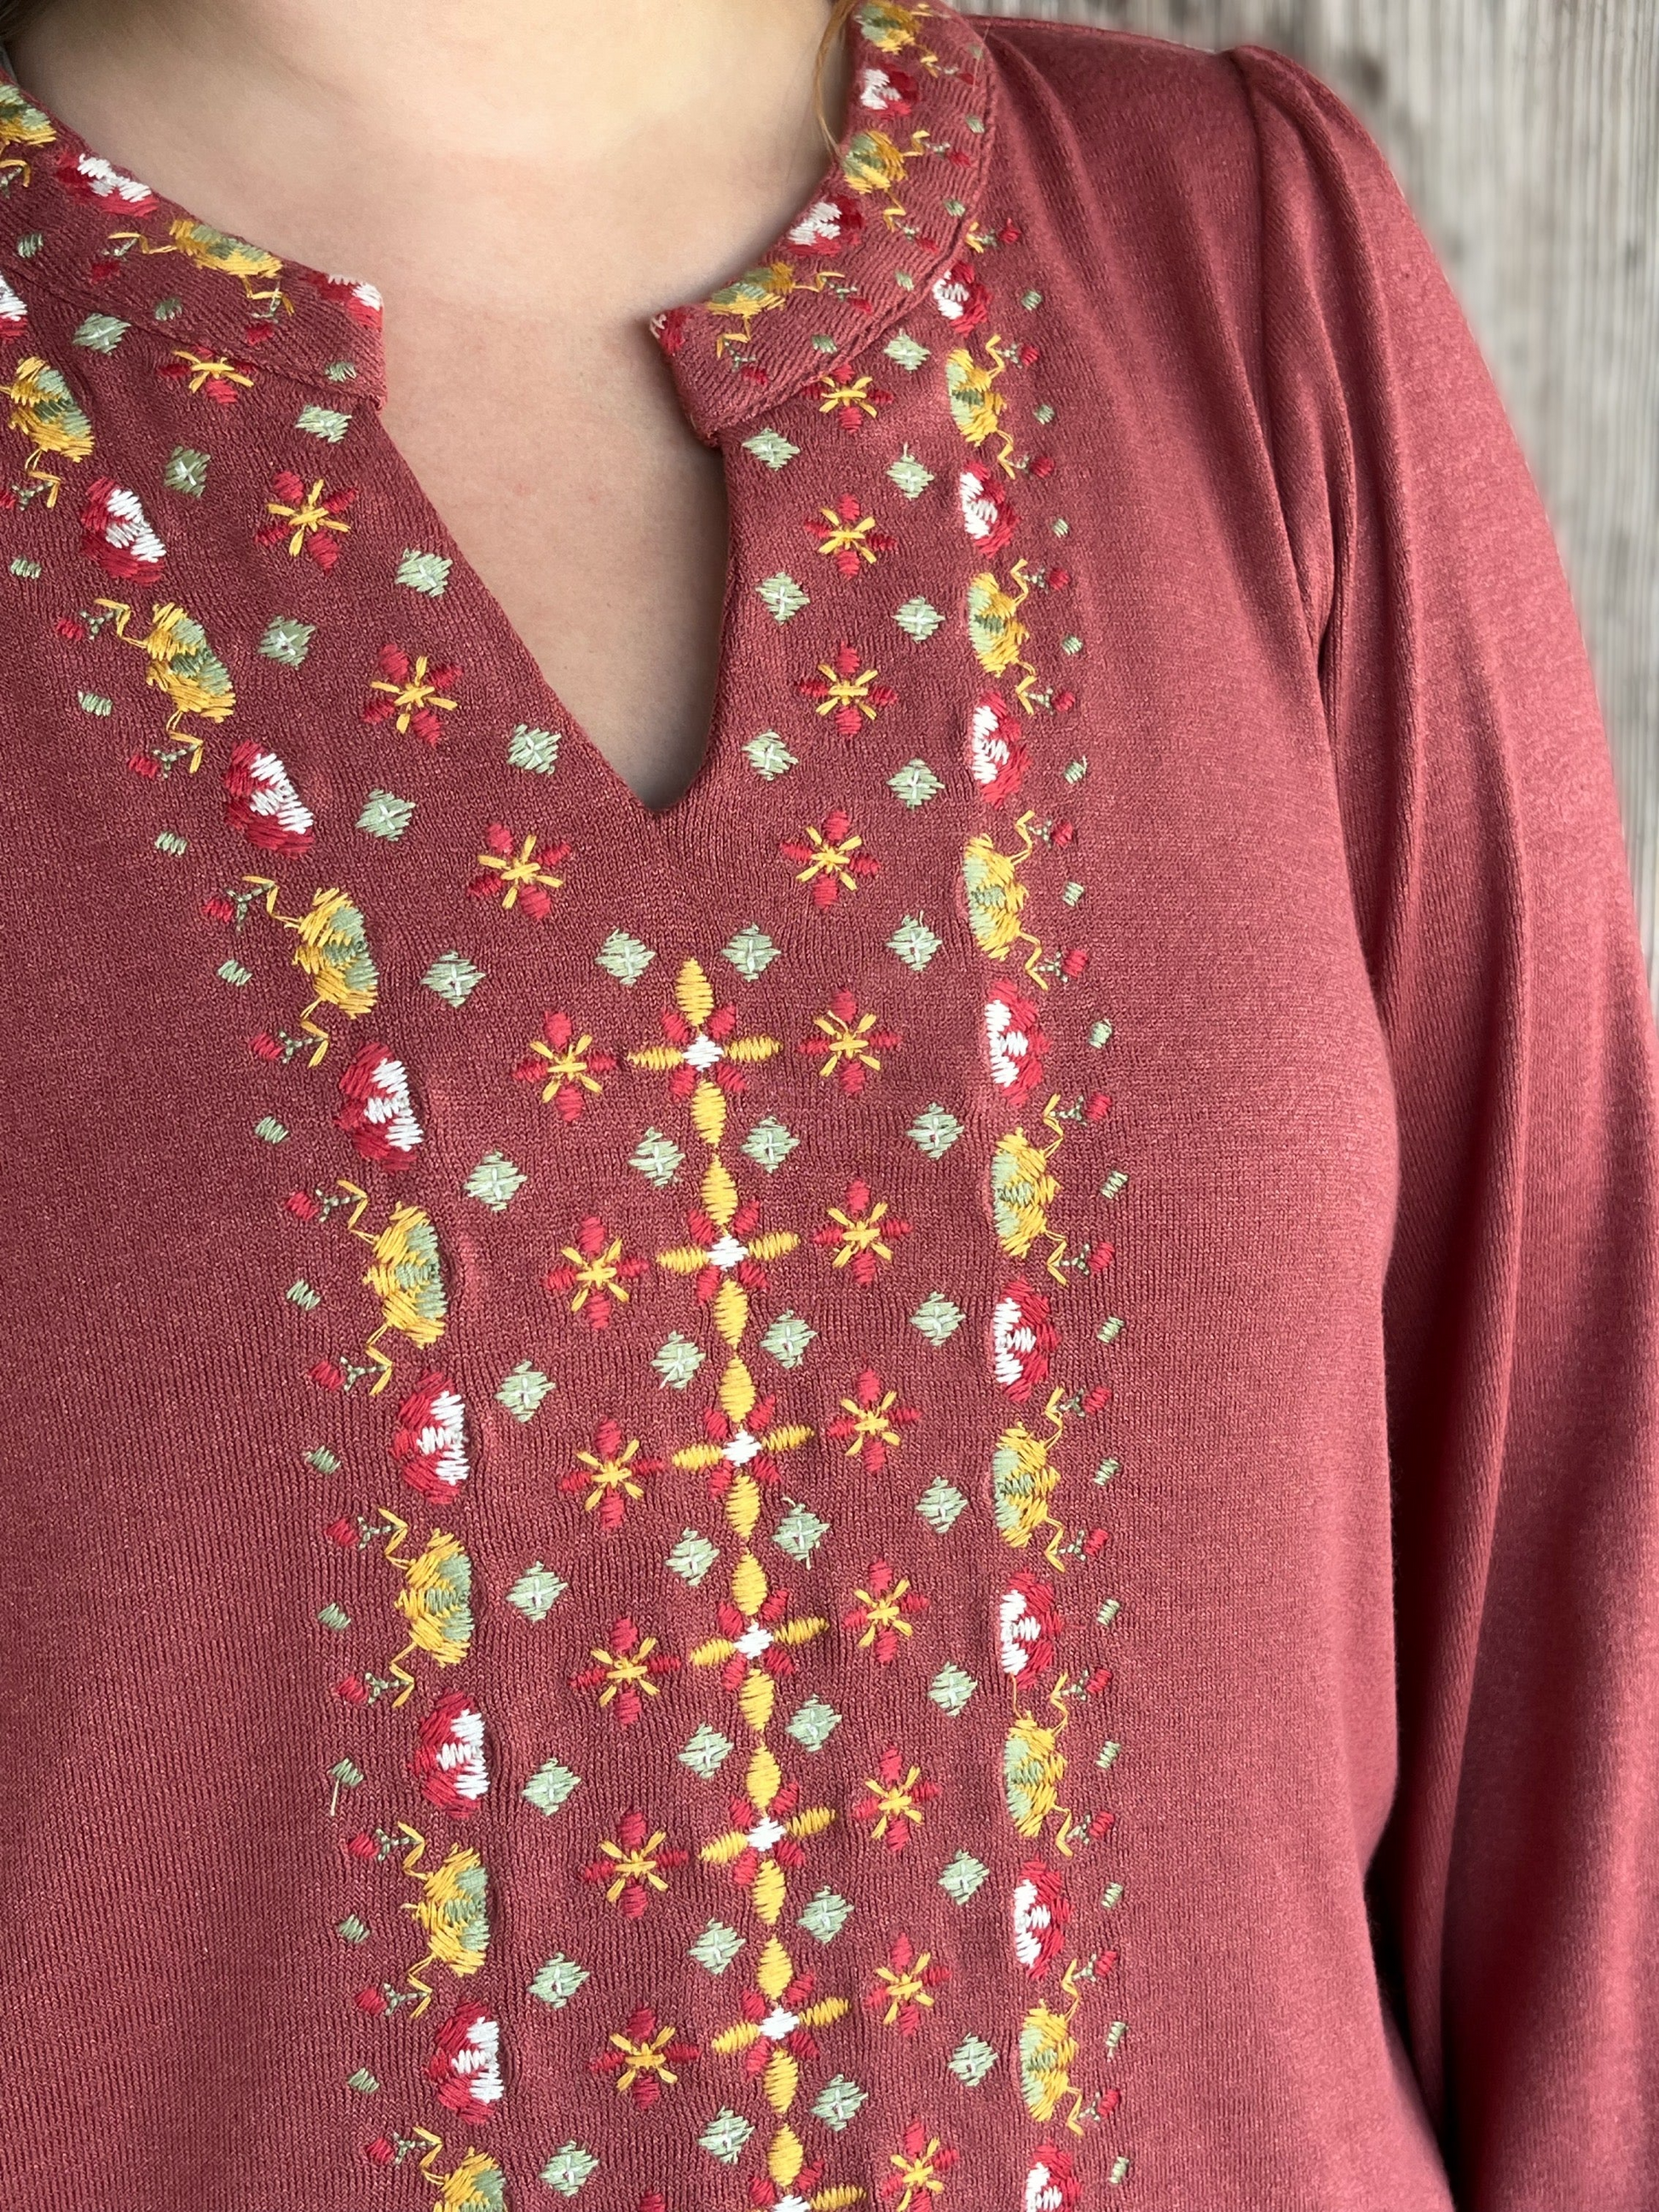 The Charli Top by Washco Apparel includes a notched v-neck with beautiful embroidery design.